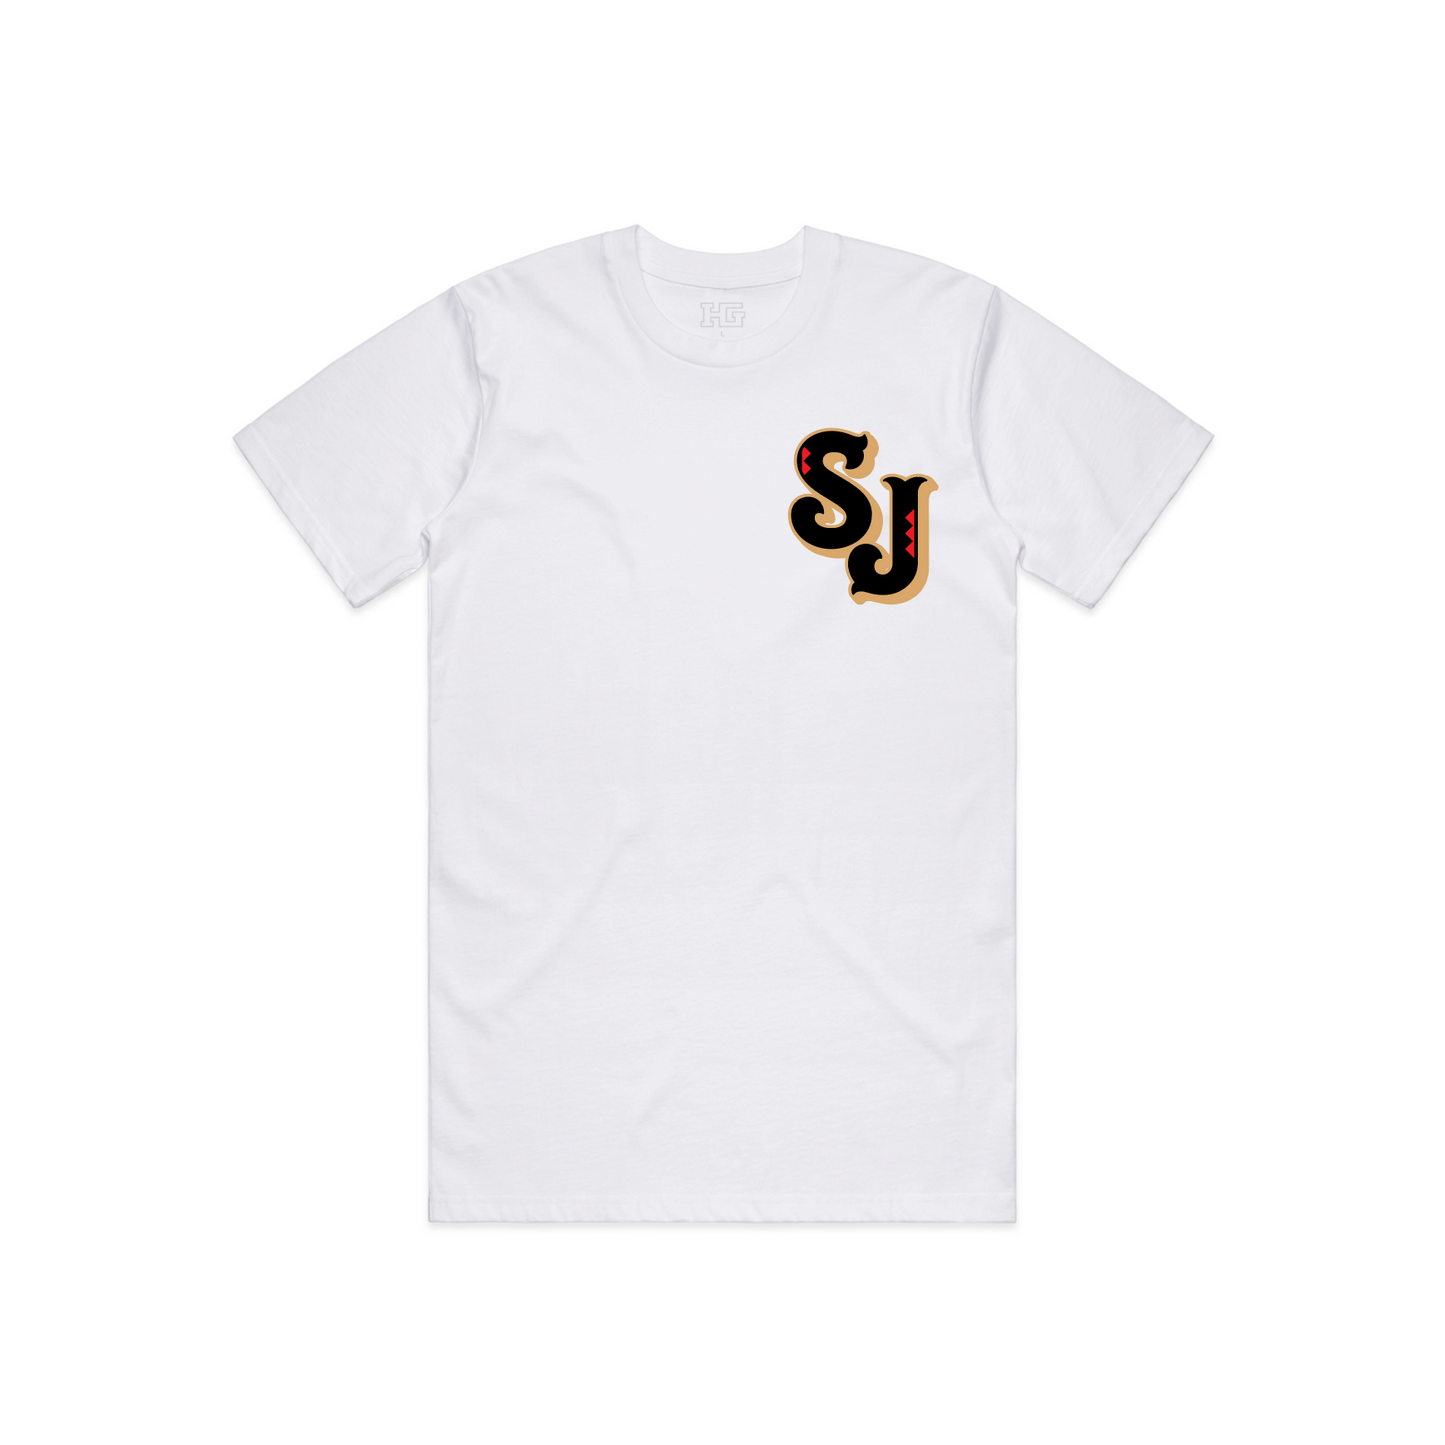 SJ Hometown Tee “Gold/Red/Black” - Available in 2 colors